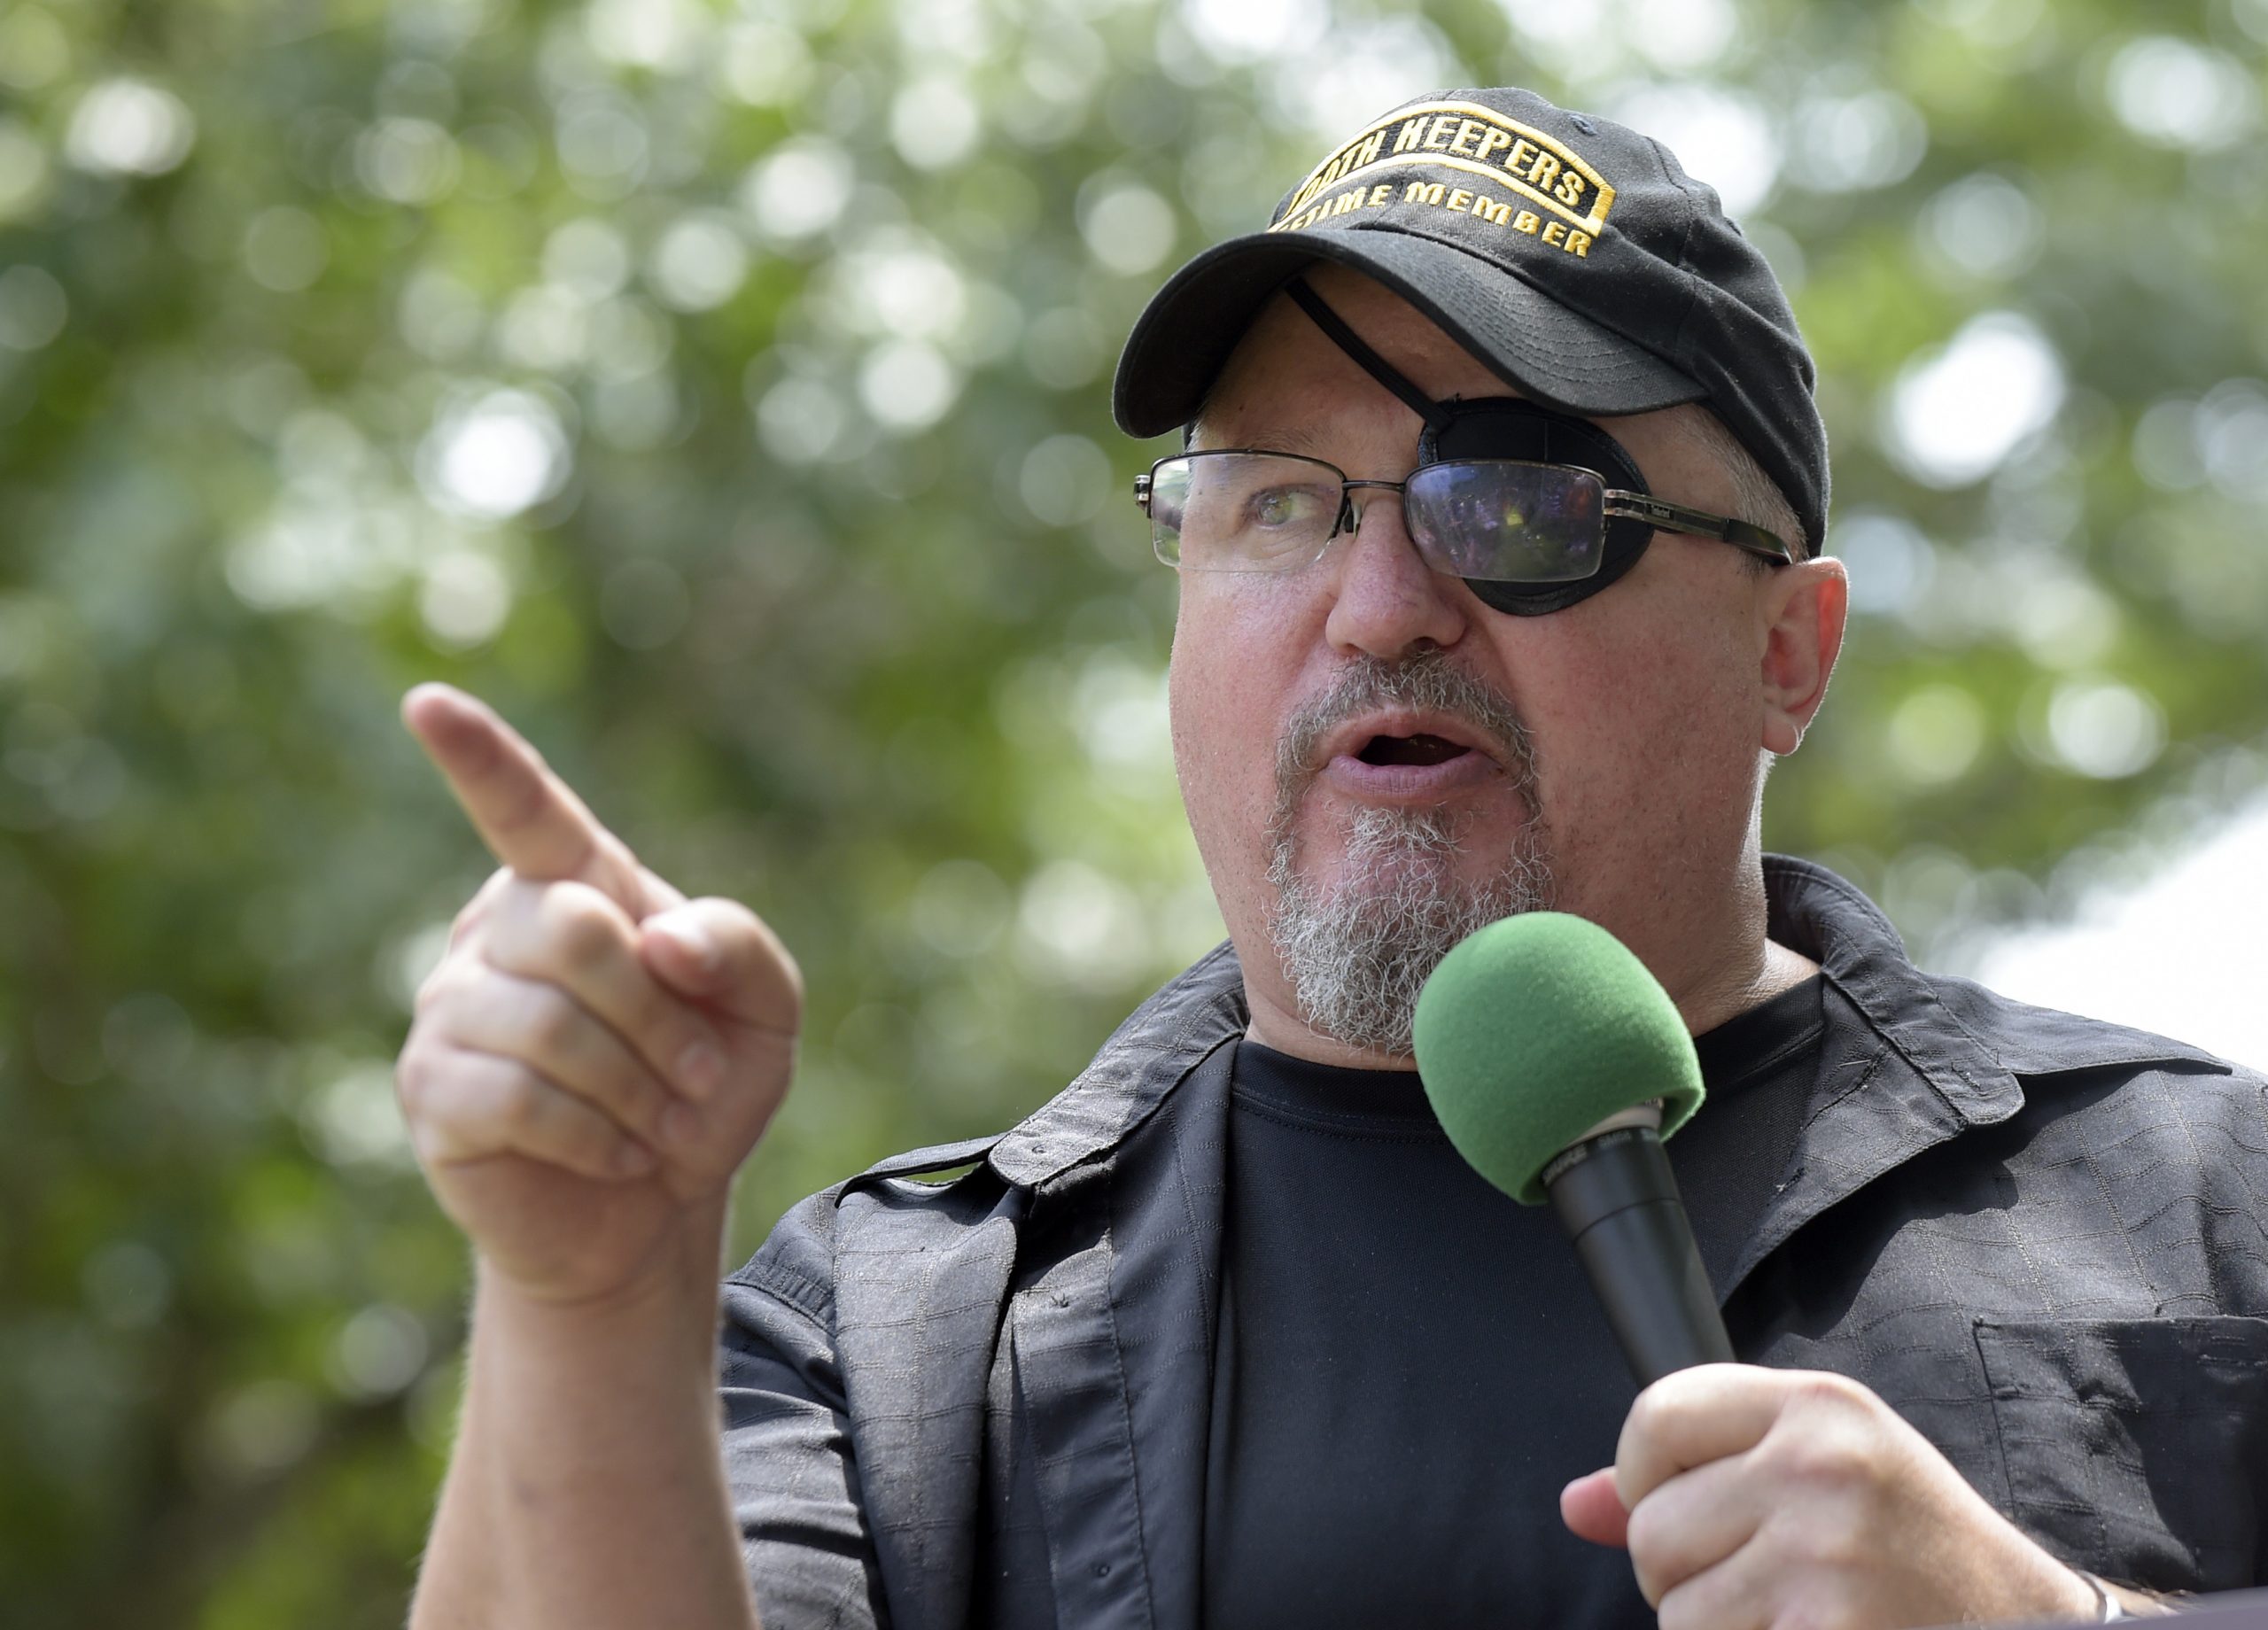 Oath Keepers founder is ordered detained pending trial in Jan. 6 riot